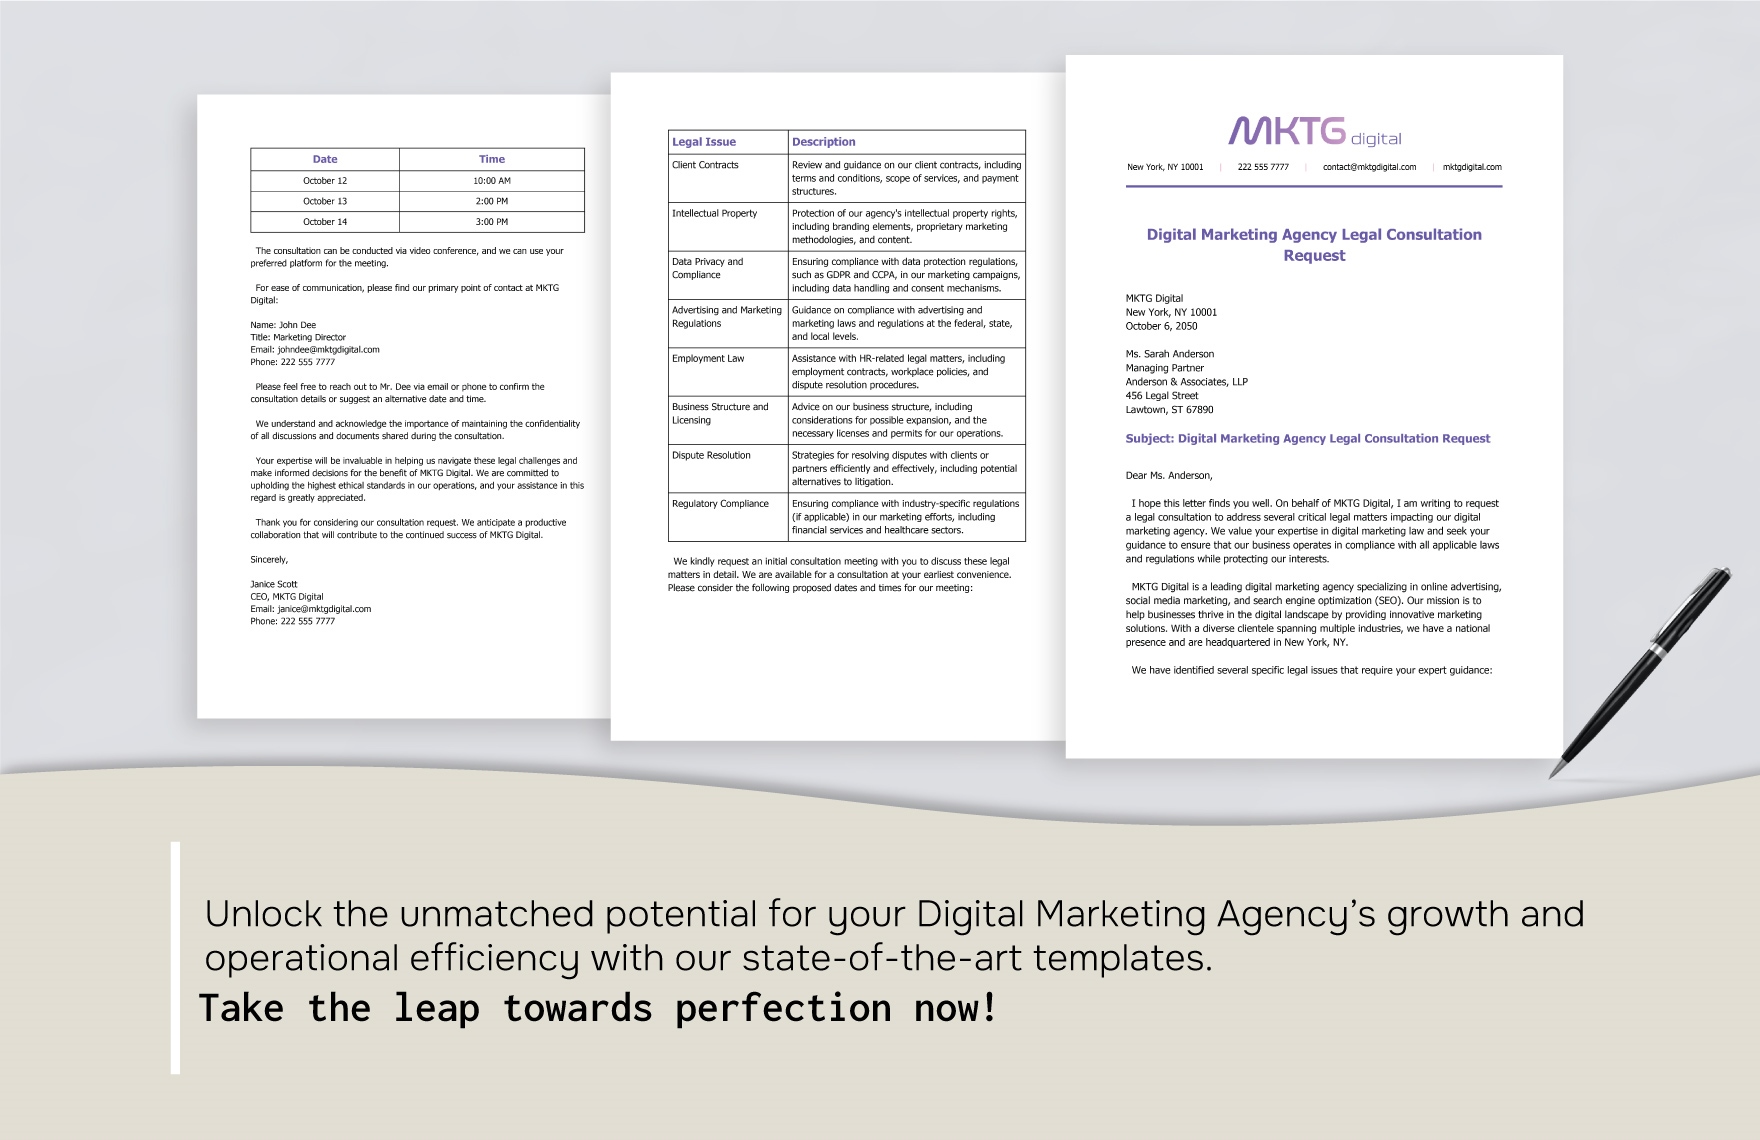 Digital Marketing Agency Legal Consultation Request Template